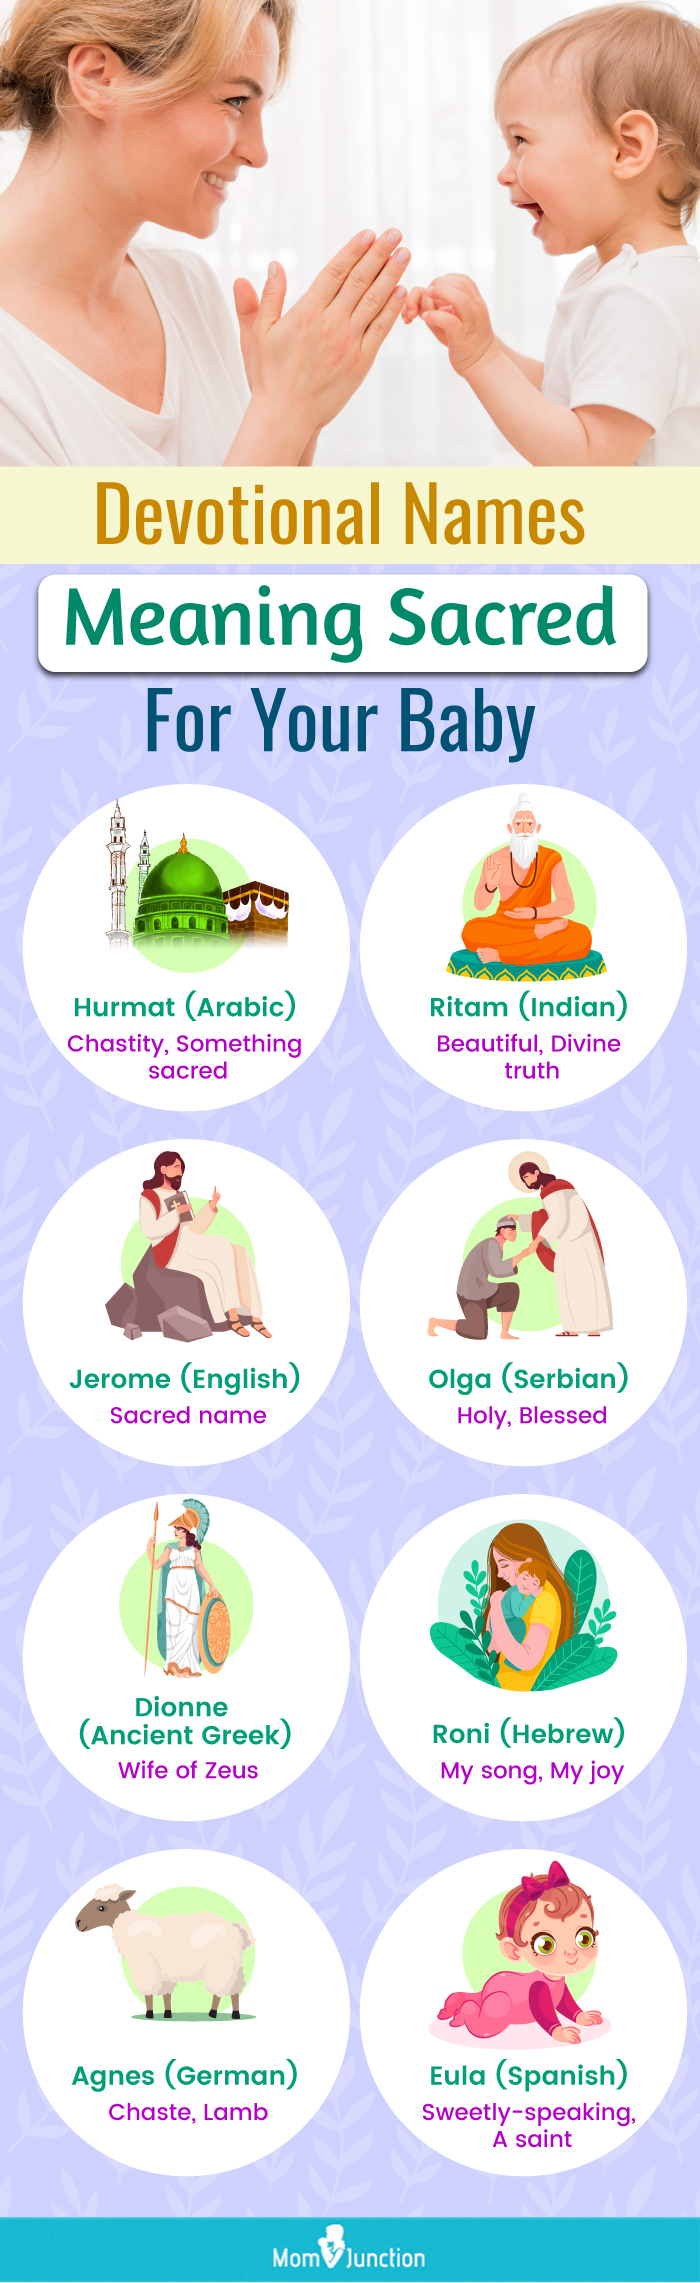 devotional names meaning sacred for your baby (infographic)